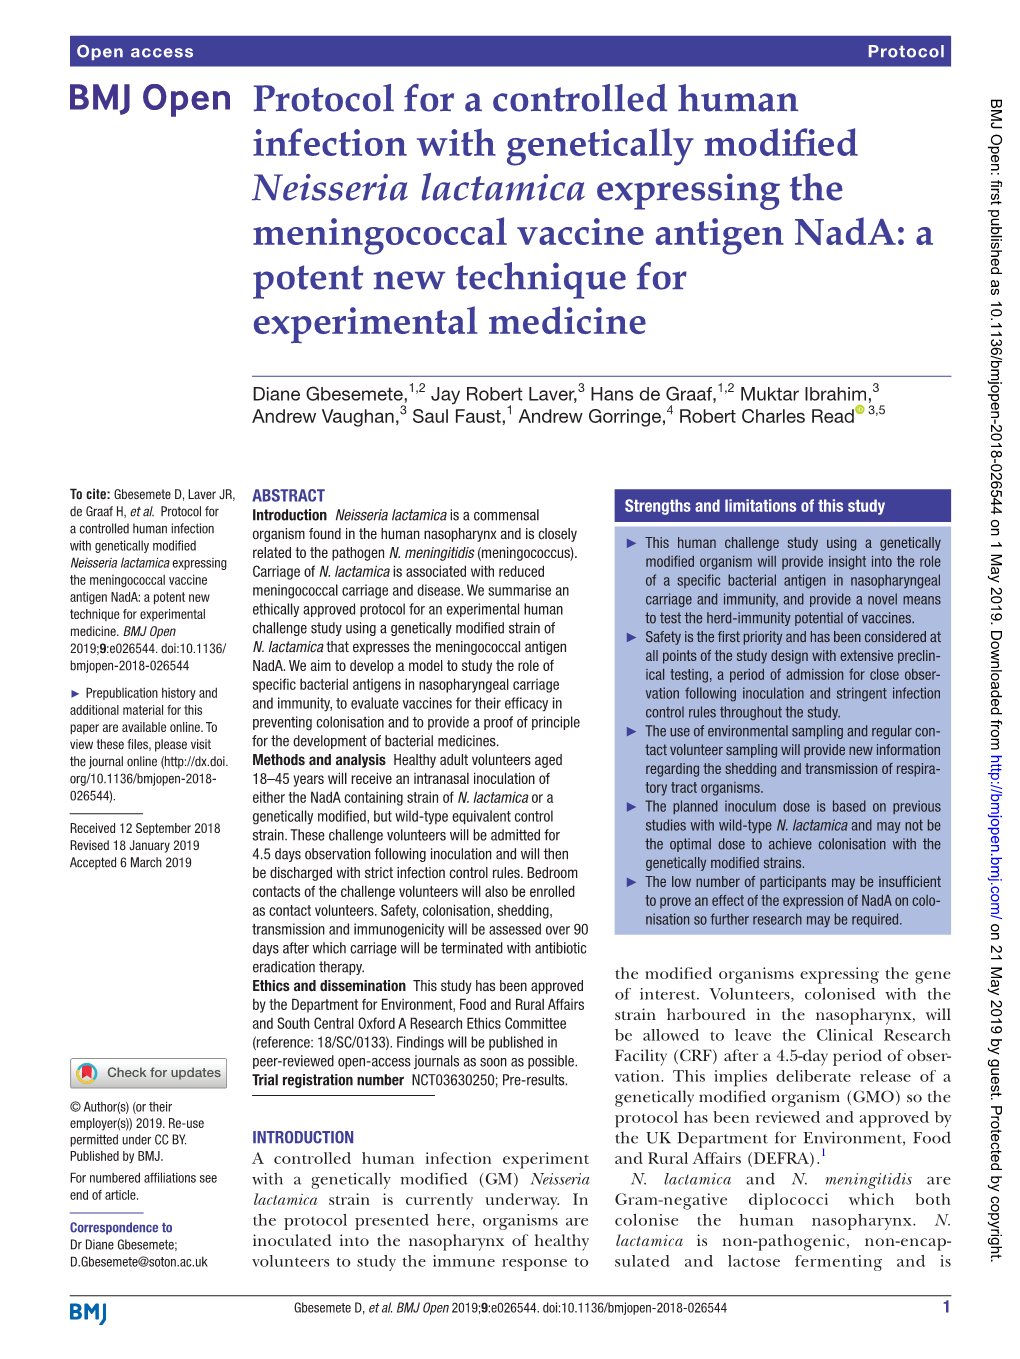 Protocol for a Controlled Human Infection with Genetically Modified Neisseria Lactamica Expressing the Meningococcal Vaccine